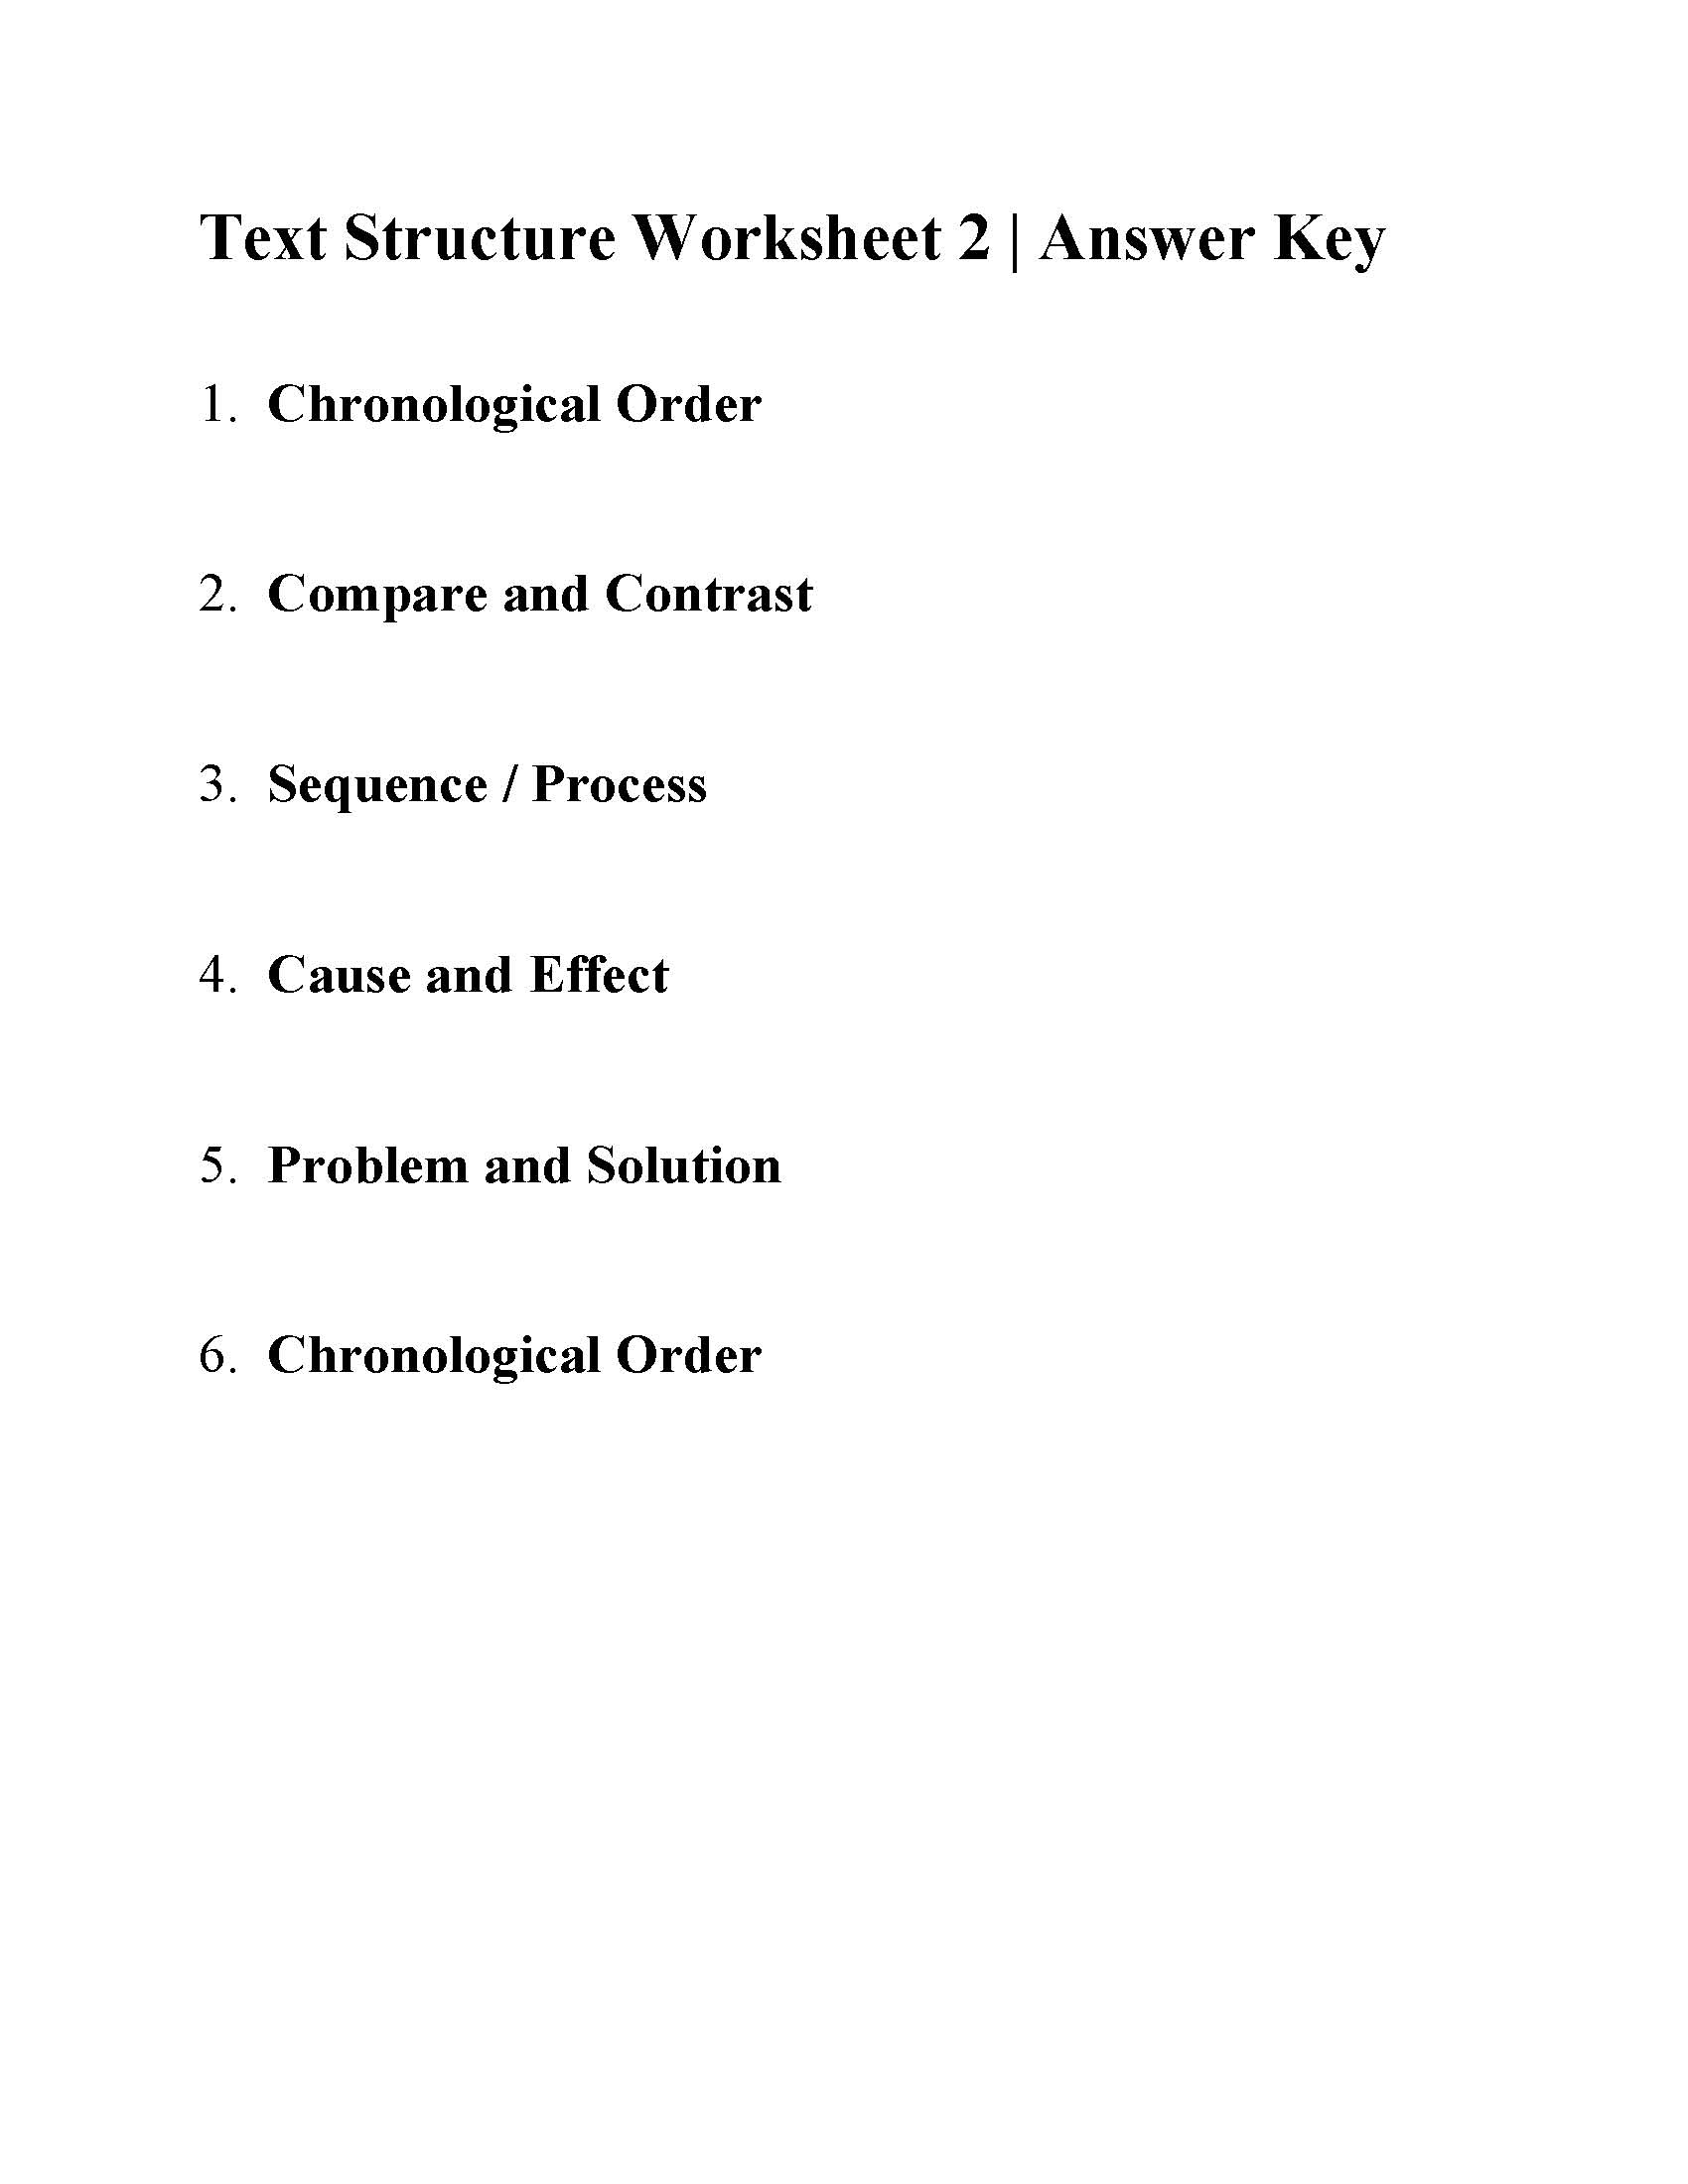 This is a preview image of Text Structure Worksheet 2. Click on it to enlarge it or view the source file.